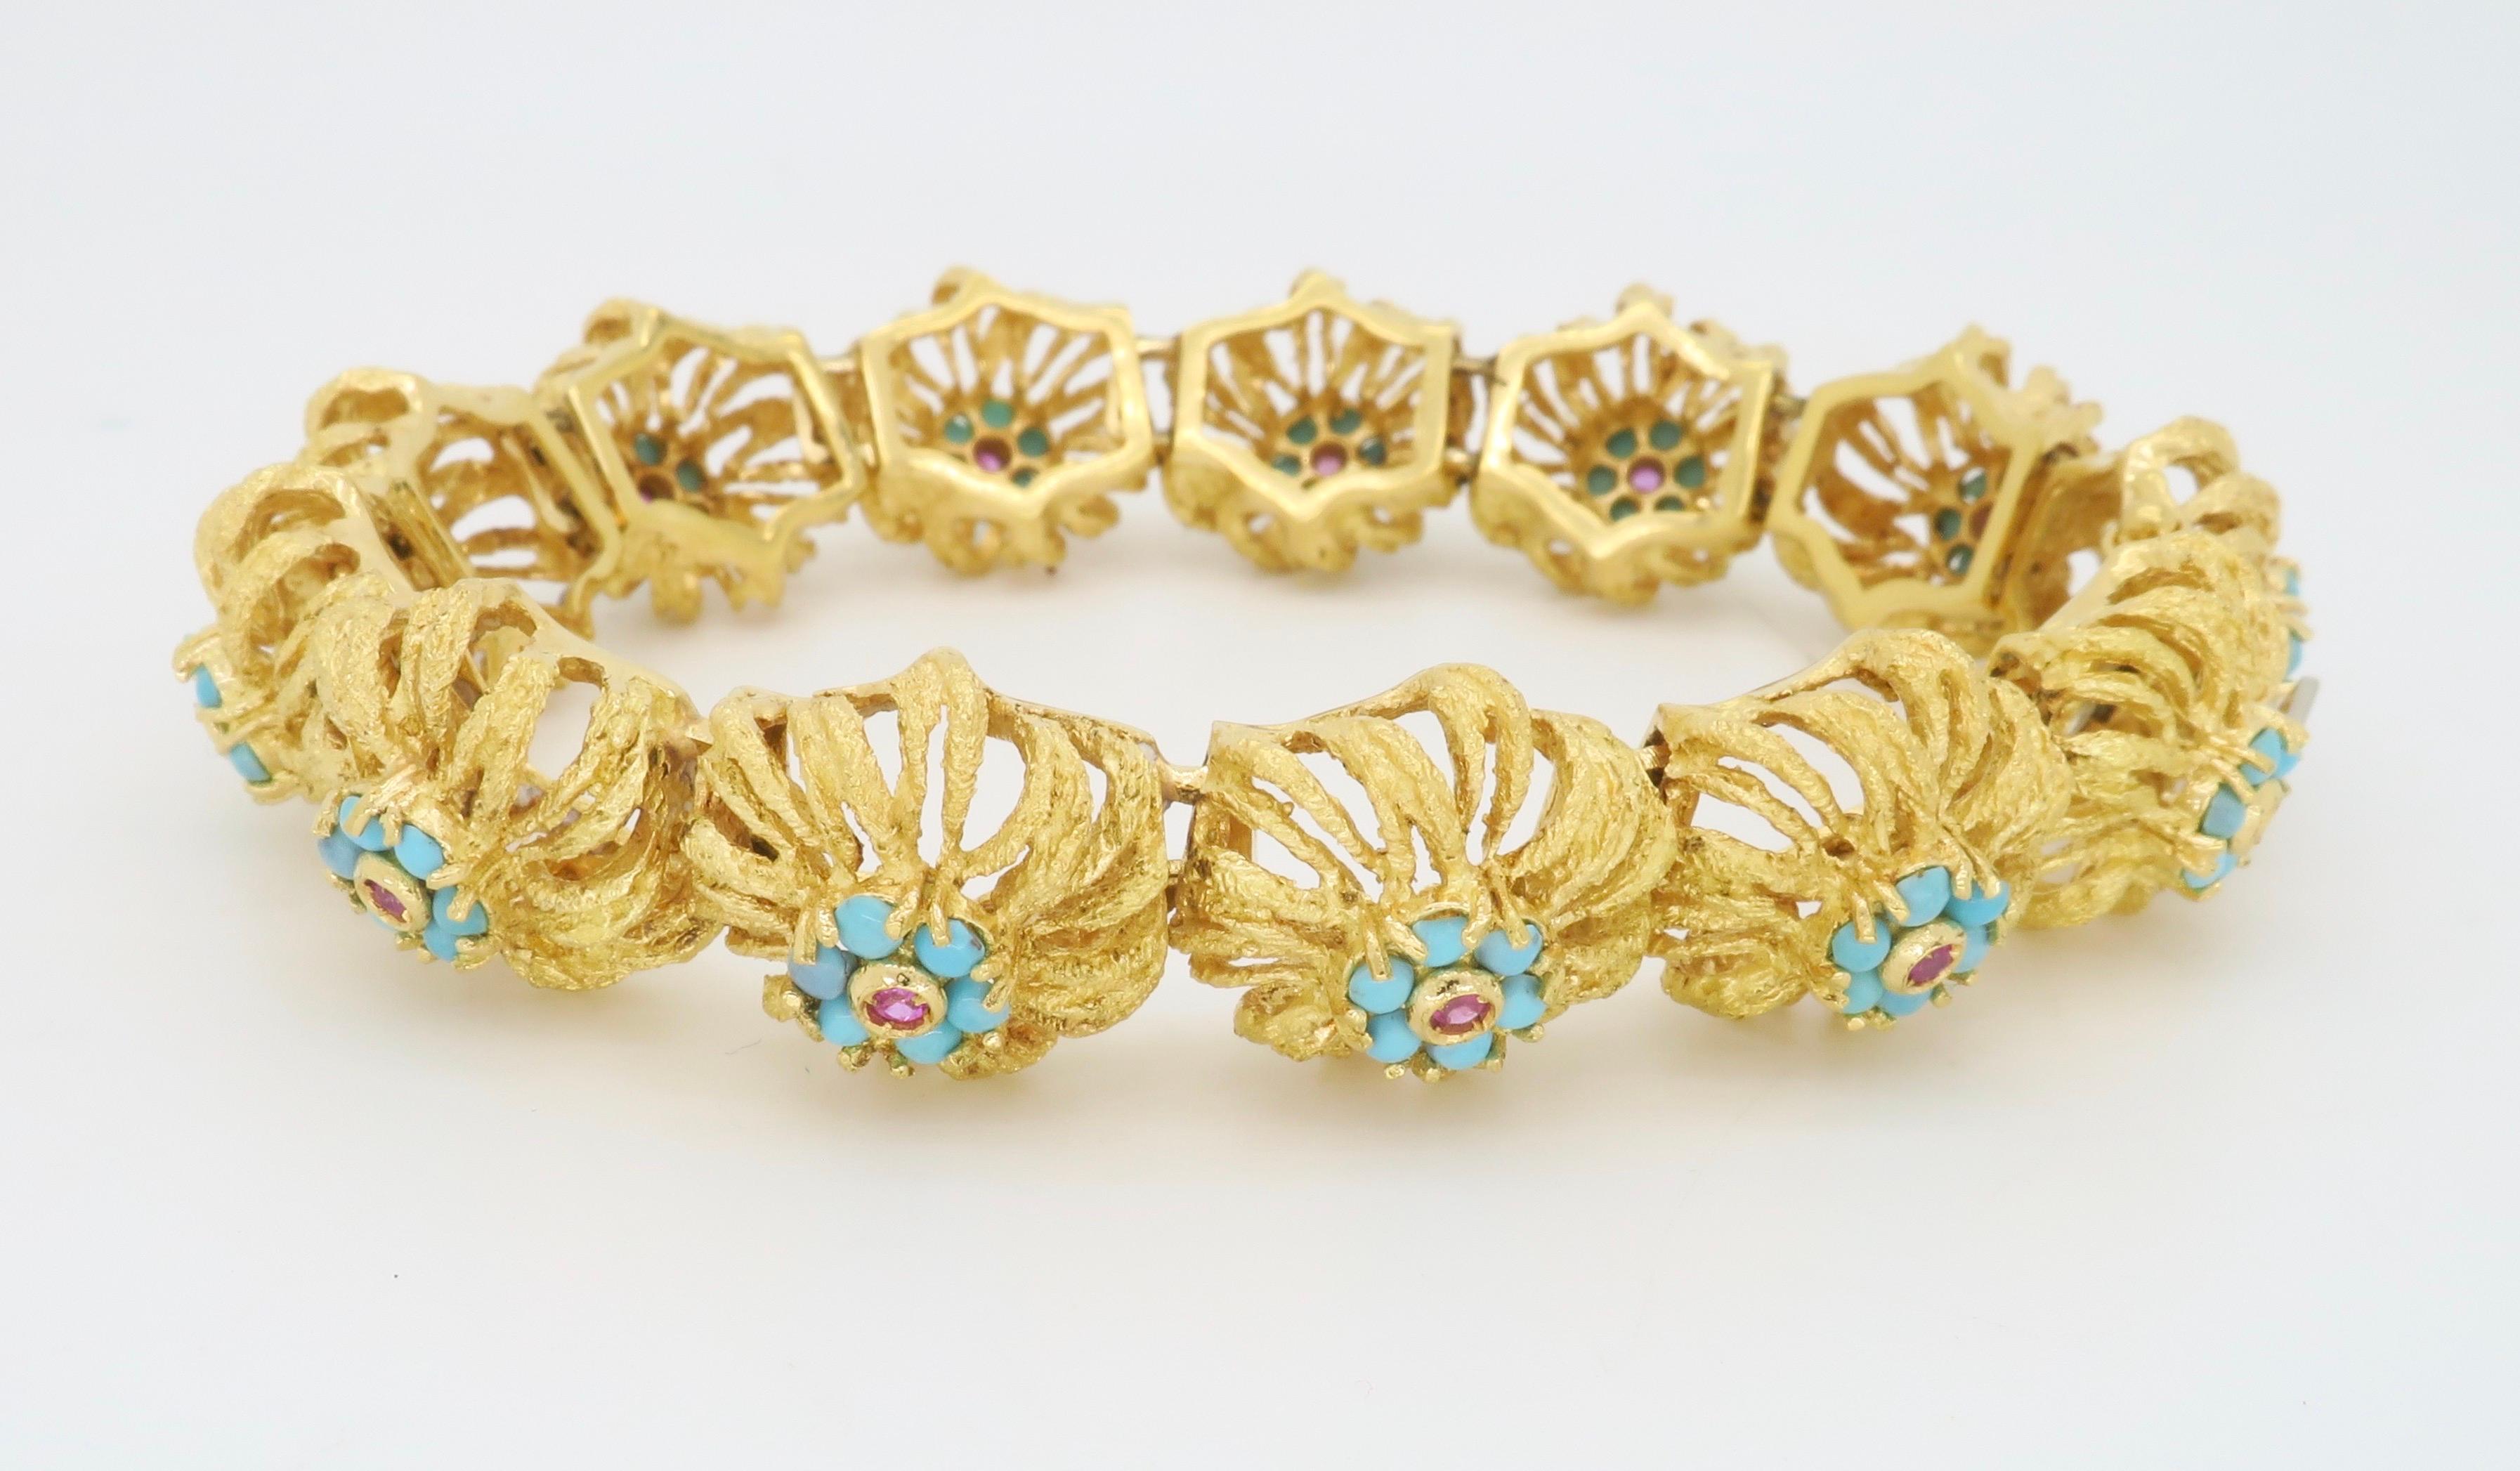 Turquoise & Ruby Floral Design Bracelet in 18k Yellow Gold 5